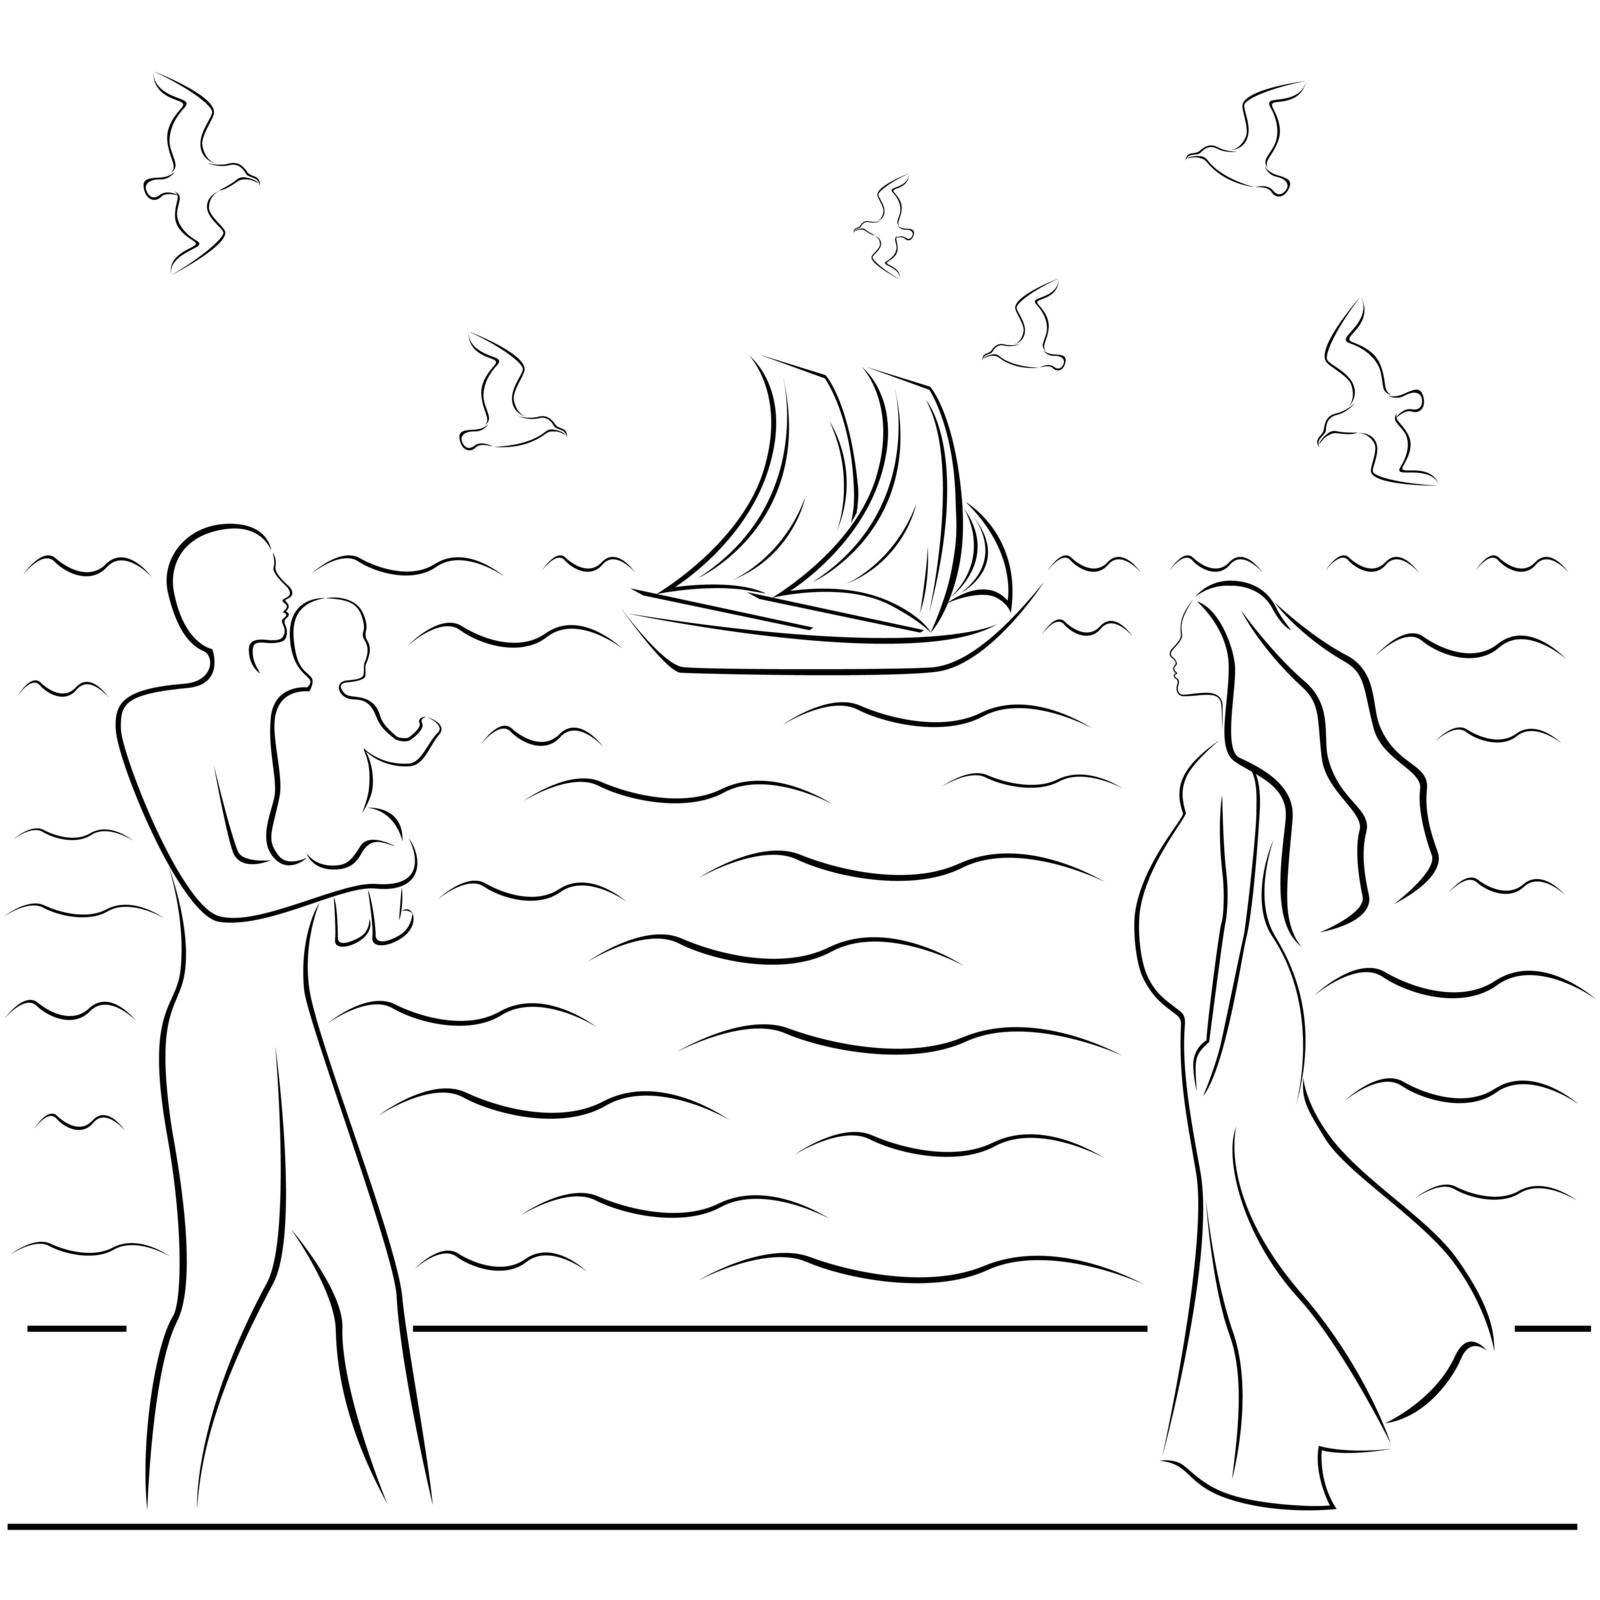 Man holding a baby and a pregnant woman on a sea coast, hand drawing black and white vector illustration